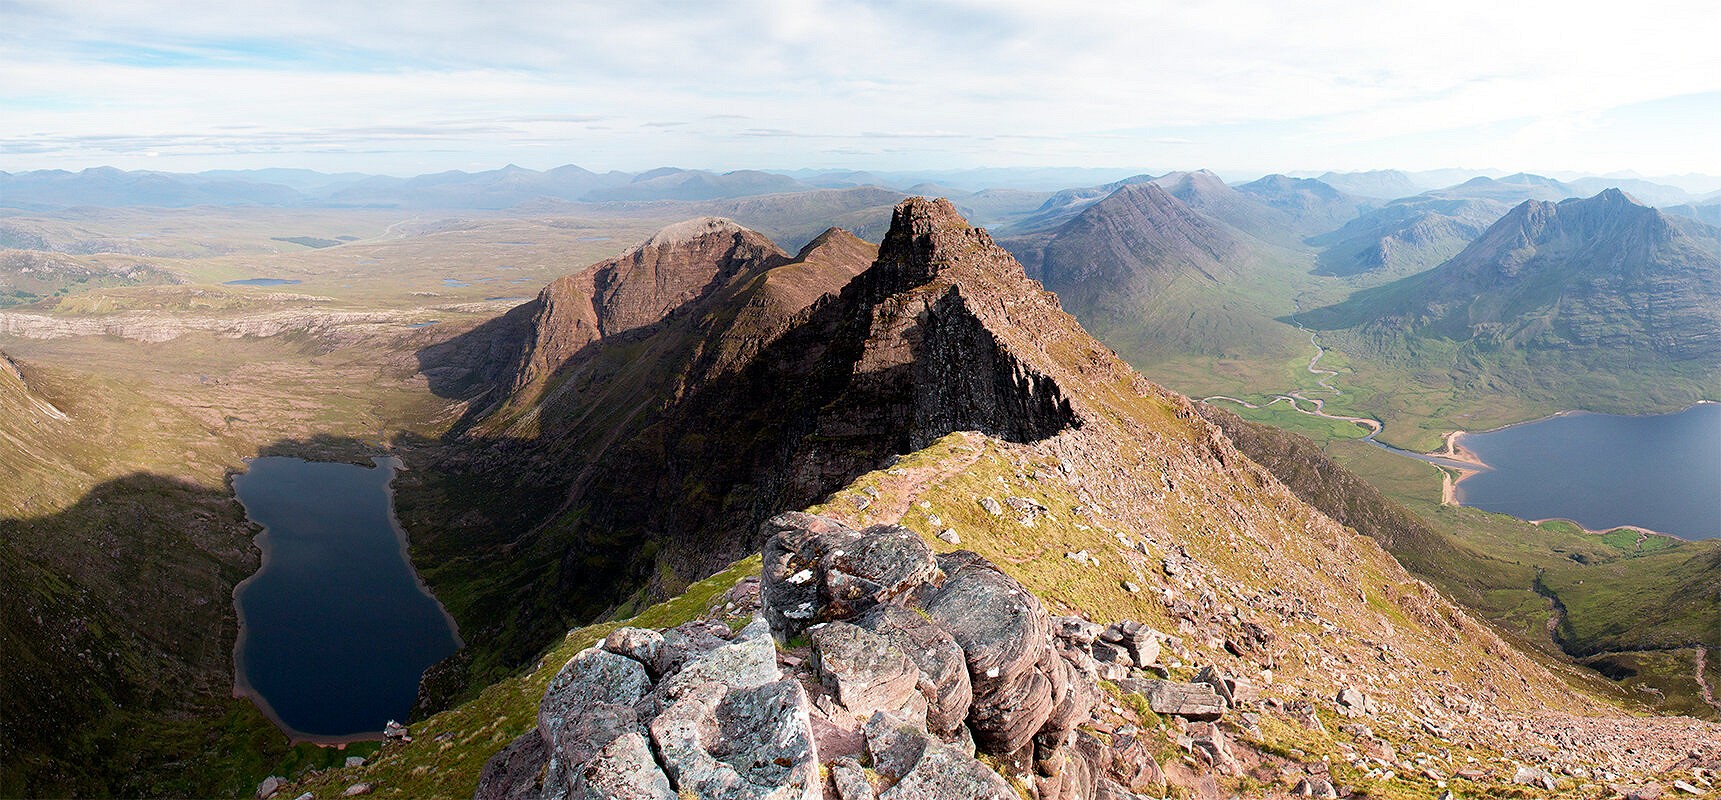 Paths on An Teallach are the first target of the new funding campaign    © Dan Bailey